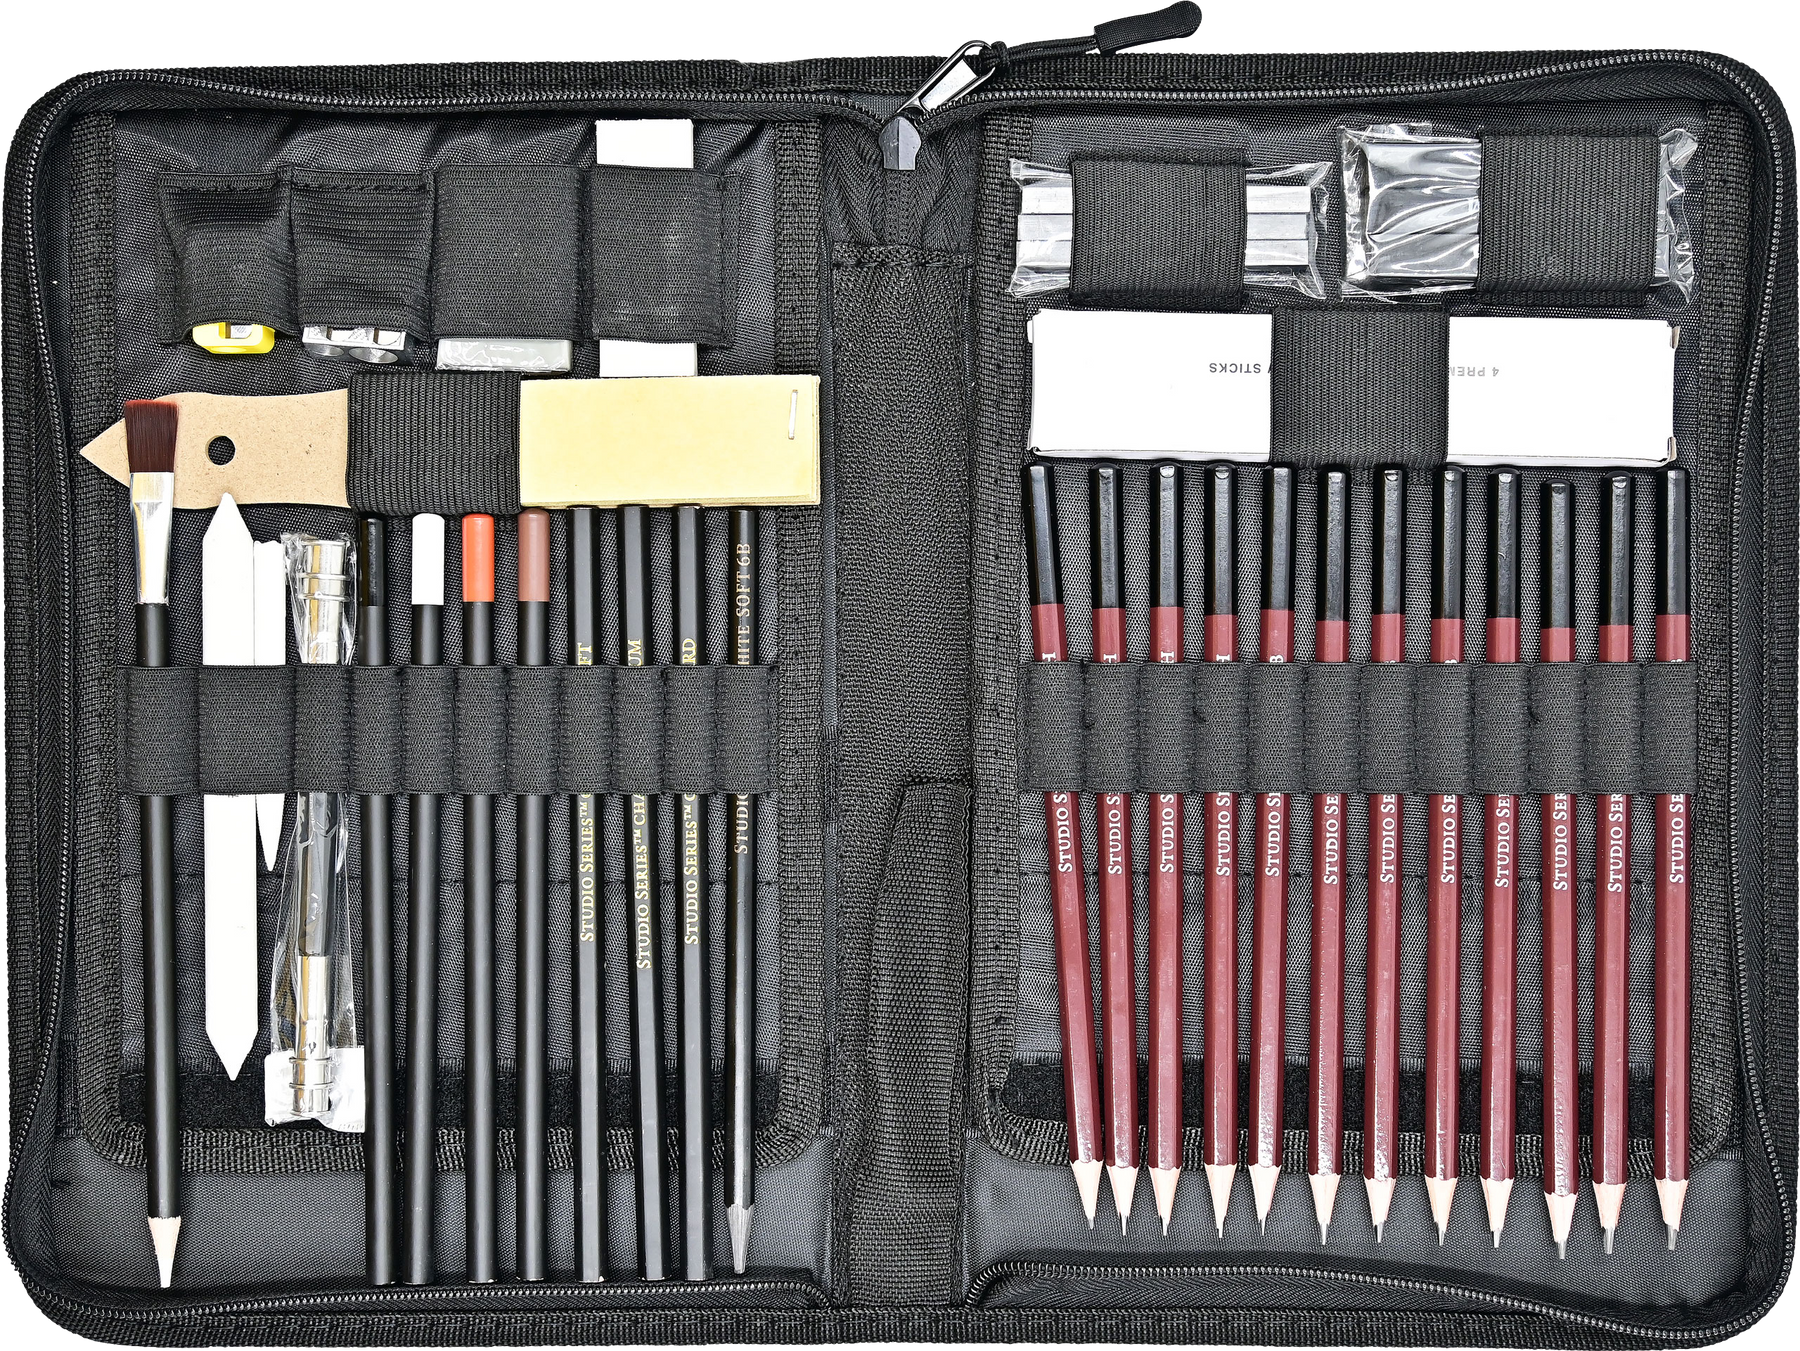 Complete professional drawing and sketching art set includes every tool you need to create amazing sketches. Sturdy zippered case protects and organizes the art supplies included. Set includes 12 graphite pencils, 3 graphite sticks, 1 woodless soft graphite pencil, 1 plastic/vinyl pencil eraser, 1 pencil extender, 3 charcoal pencils, 3 charcoal sticks, 4 charcoal willow sticks, and 1 kneaded charcoal eraser.